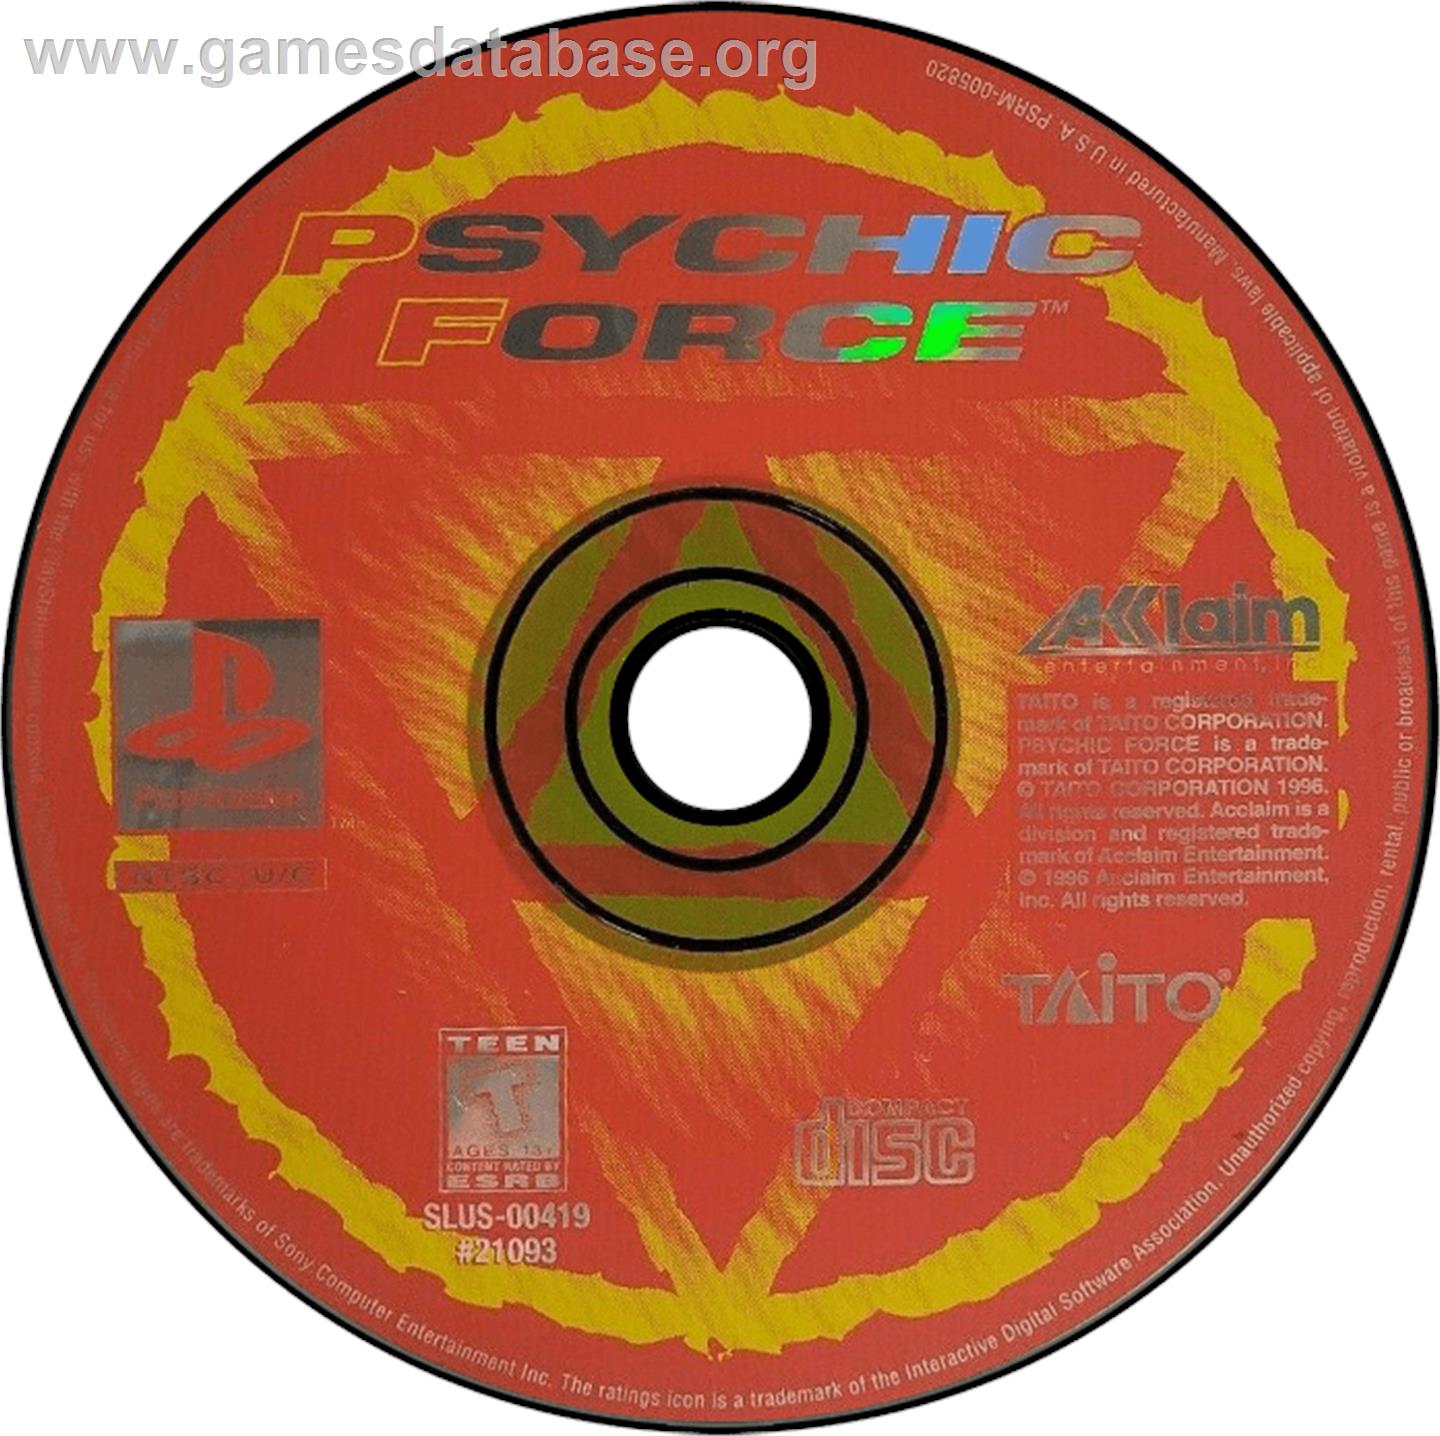 Psychic Force - Sony Playstation - Artwork - Disc